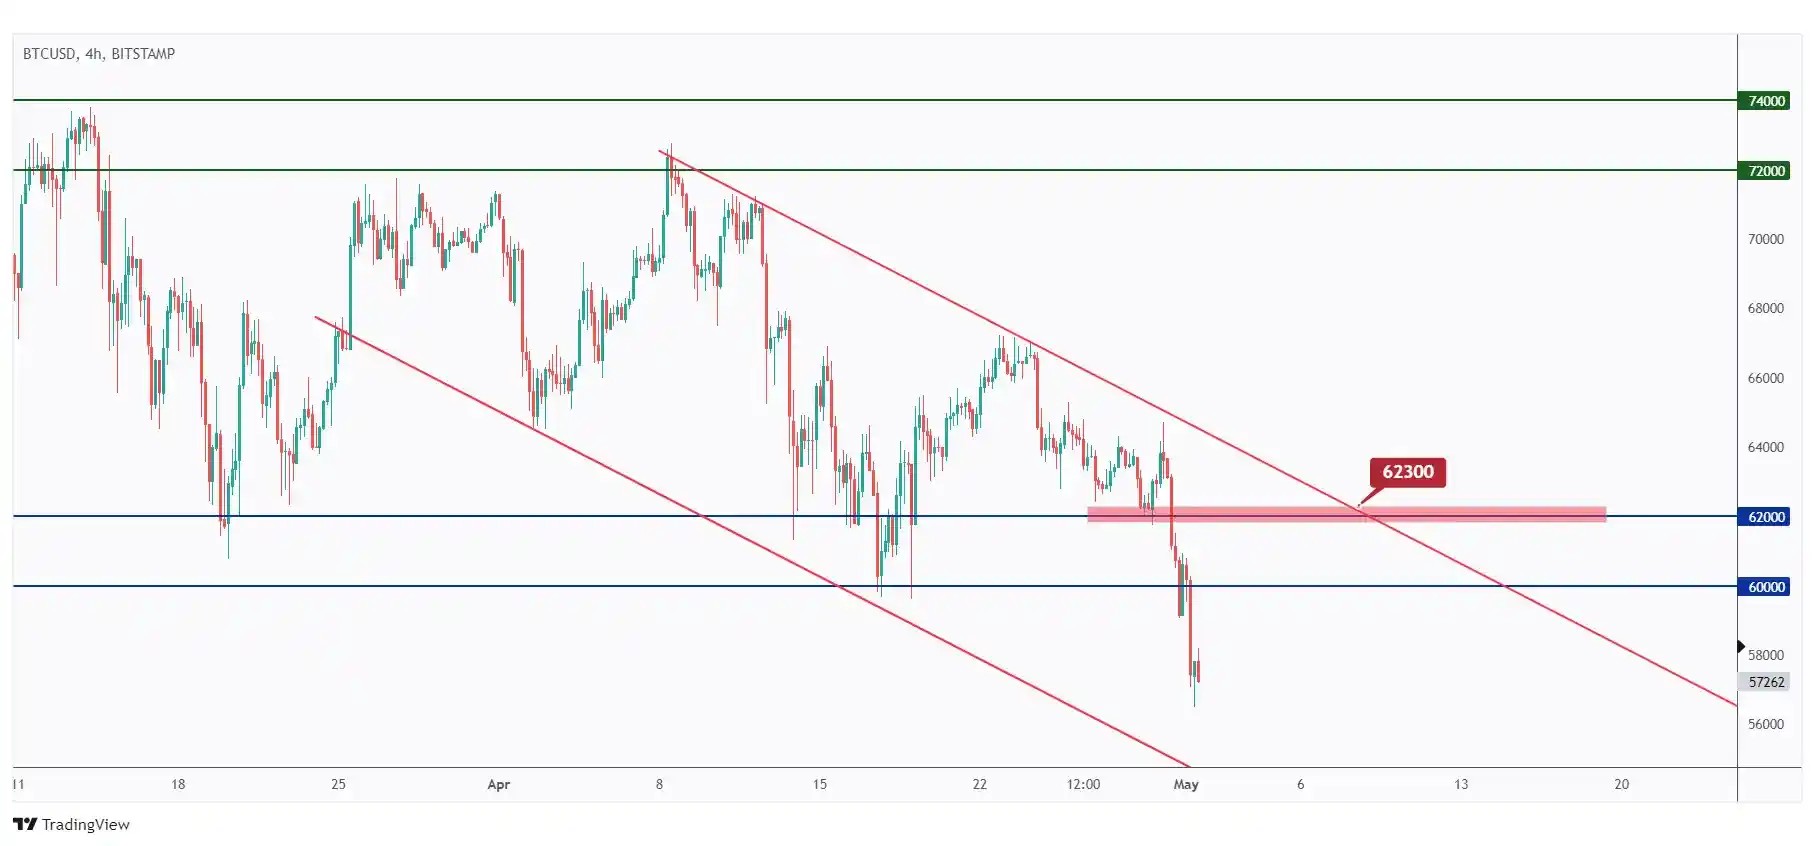 BTC 4h chart showing the last major high at $62,300 that we need a break above for the bulls to take over.